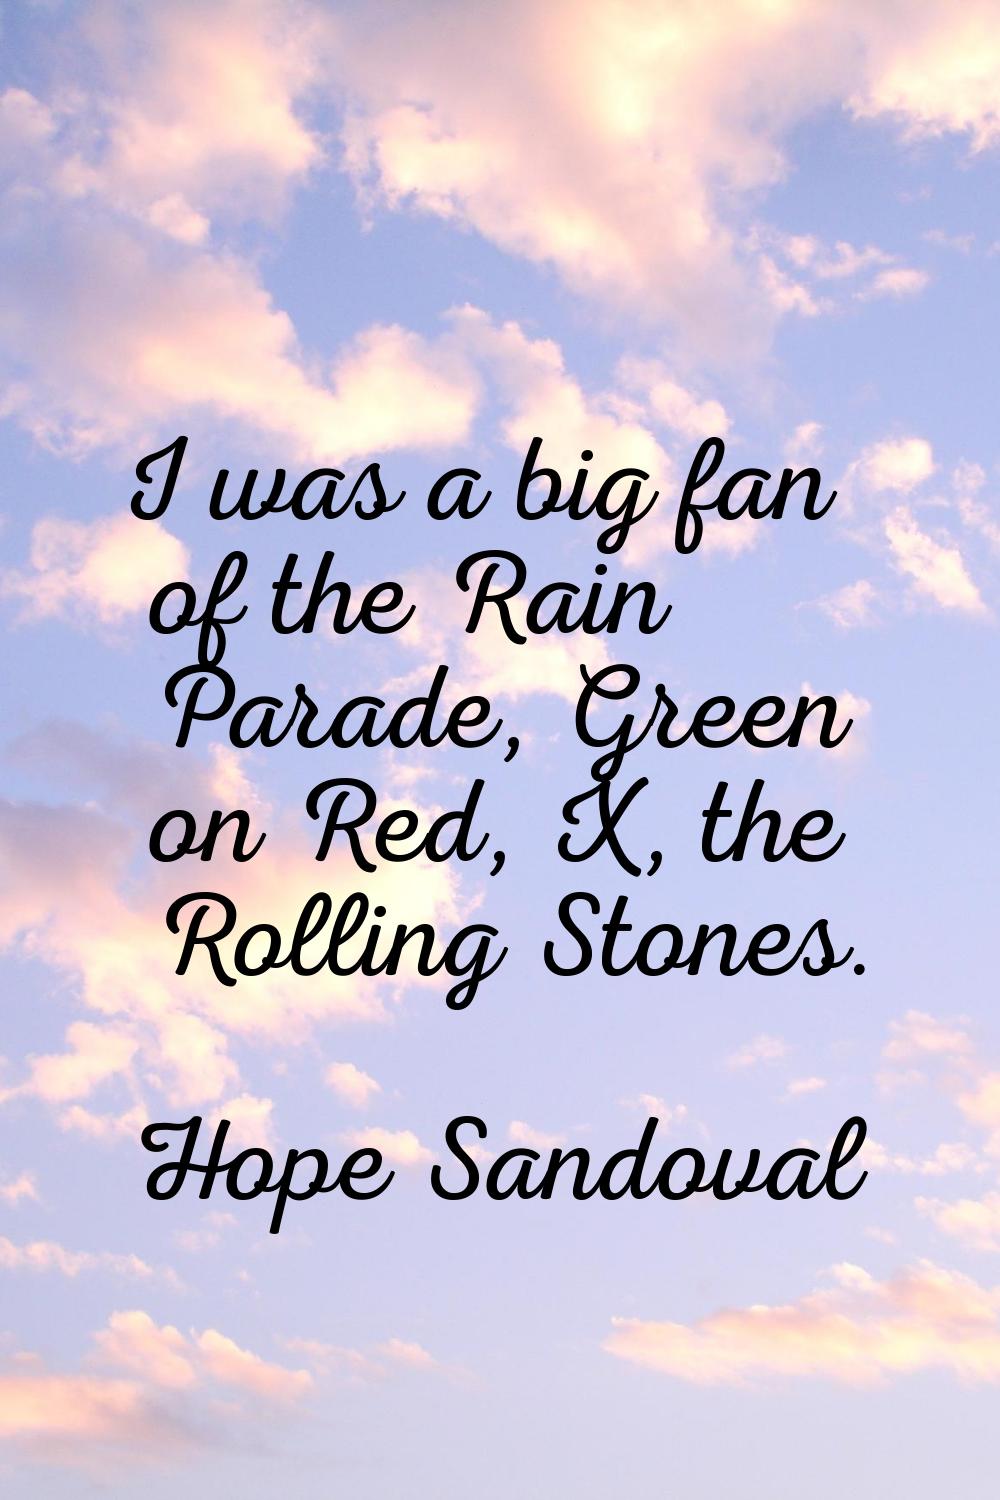 I was a big fan of the Rain Parade, Green on Red, X, the Rolling Stones.